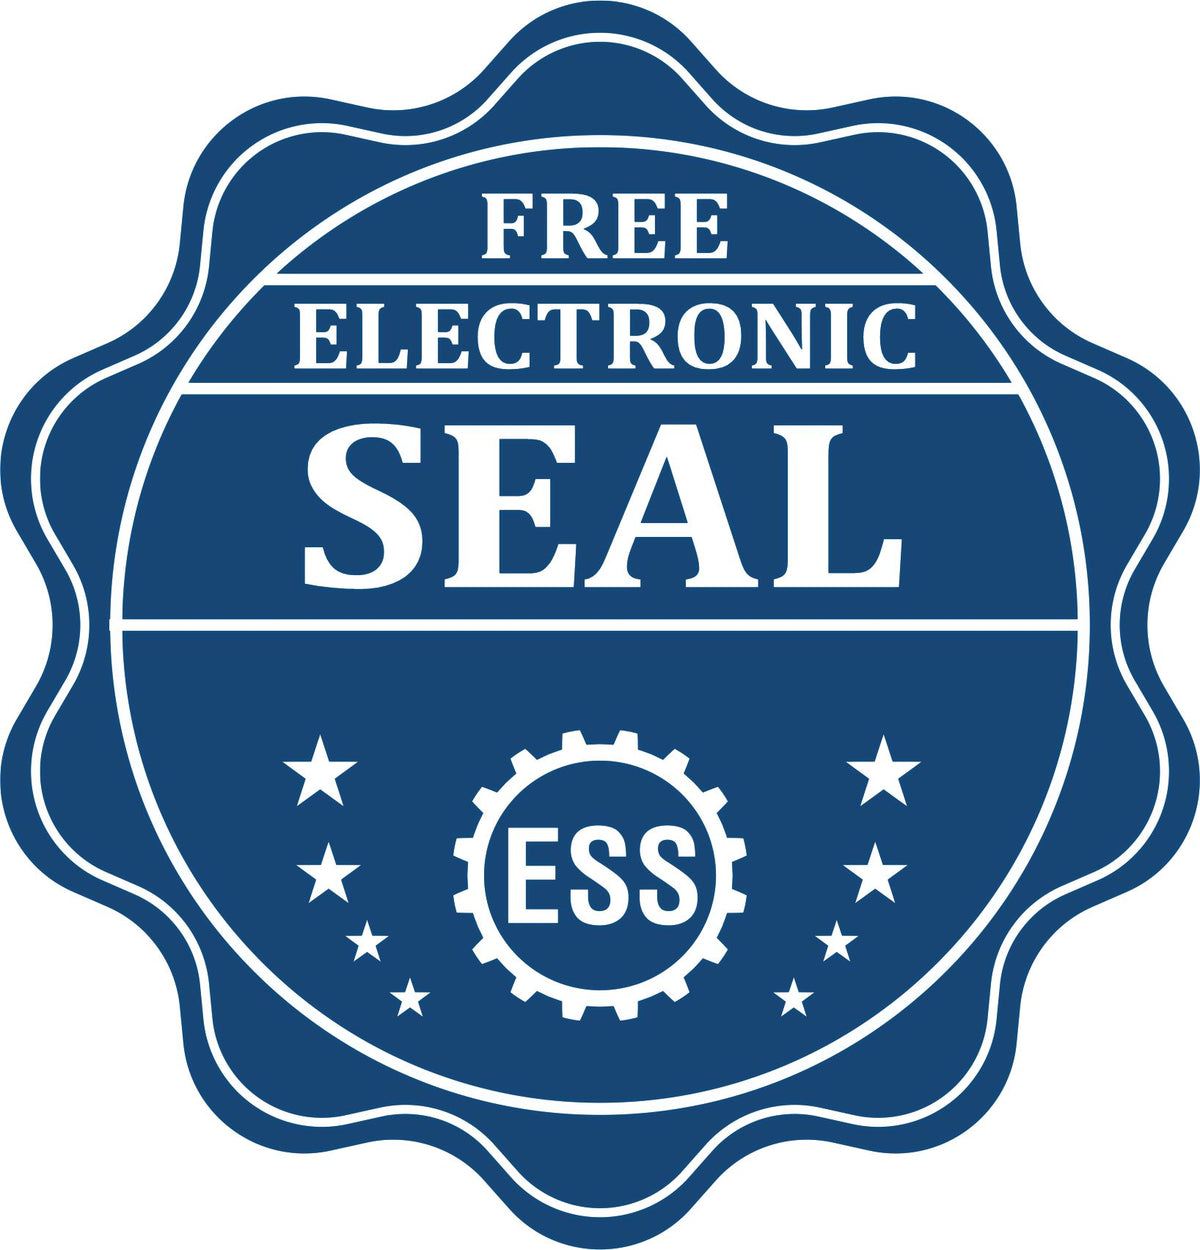 A badge showing a free electronic seal for the Gift Maine Land Surveyor Seal with stars and the ESS gear on the emblem.